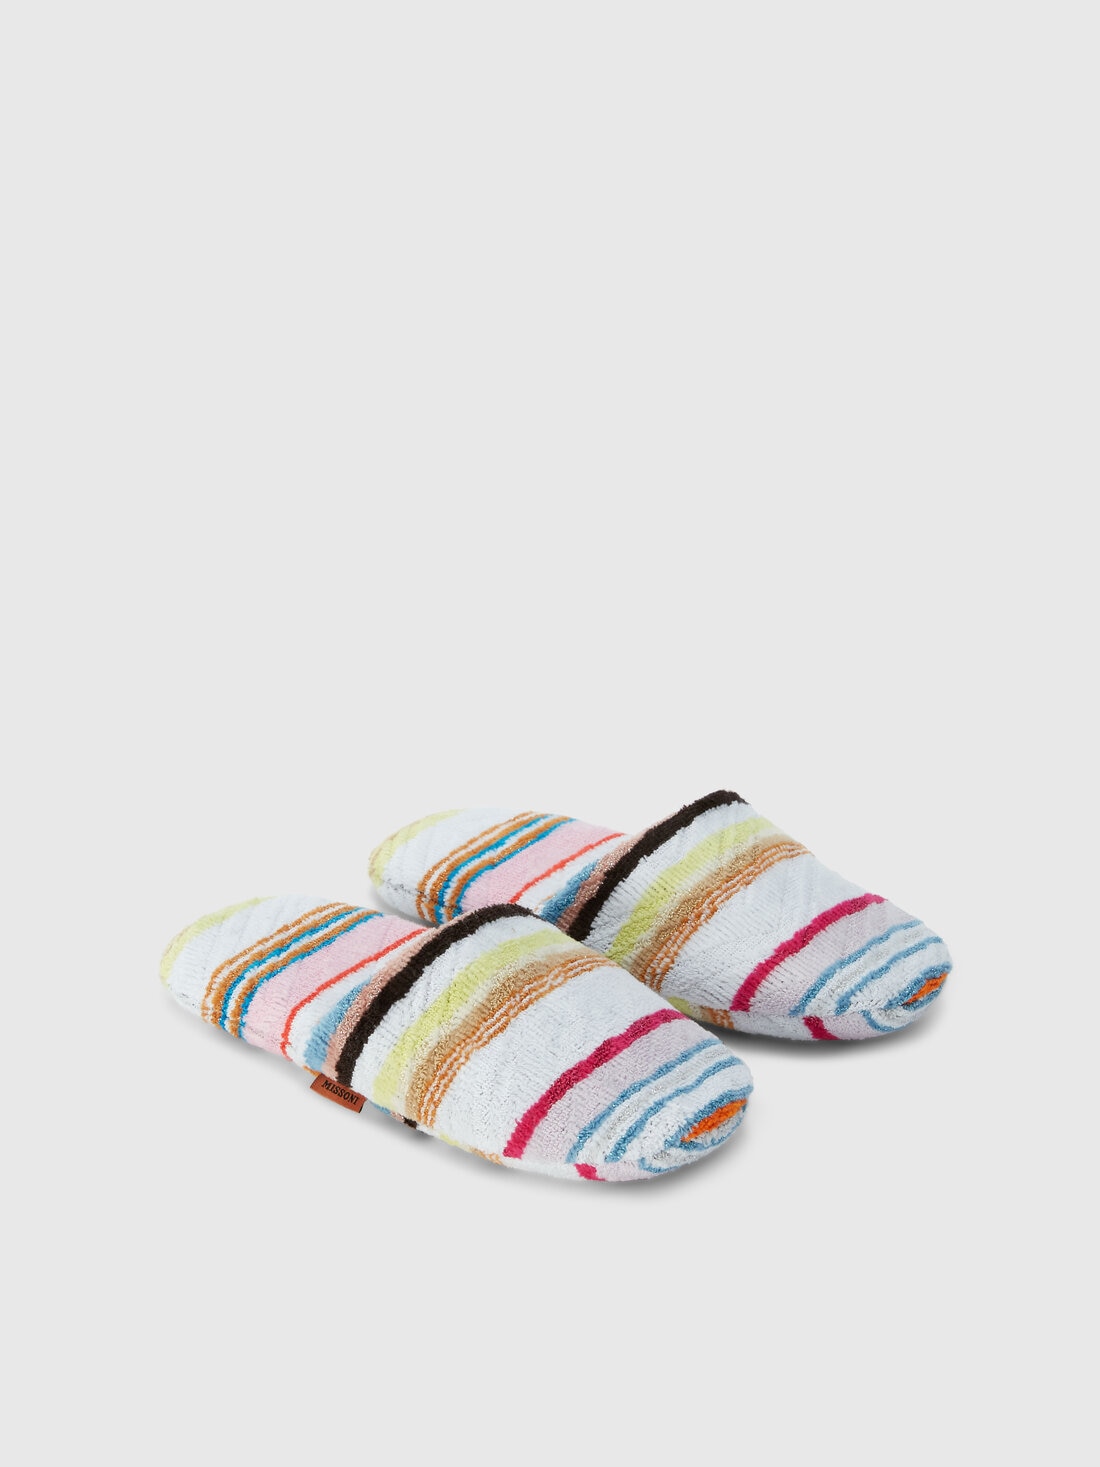 Moonshadow cotton terry slippers with lurex, Multicoloured  - 1D3OG00001100 - 1